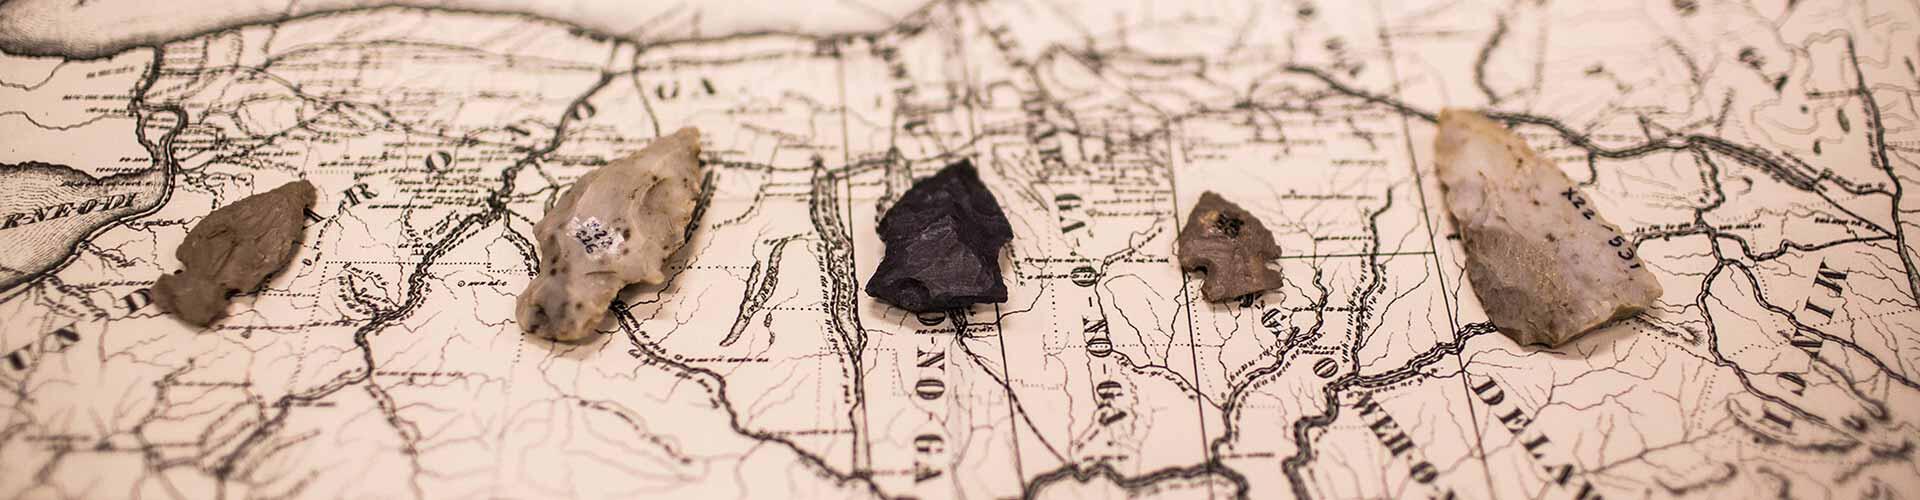 Artifacts resting on a map.